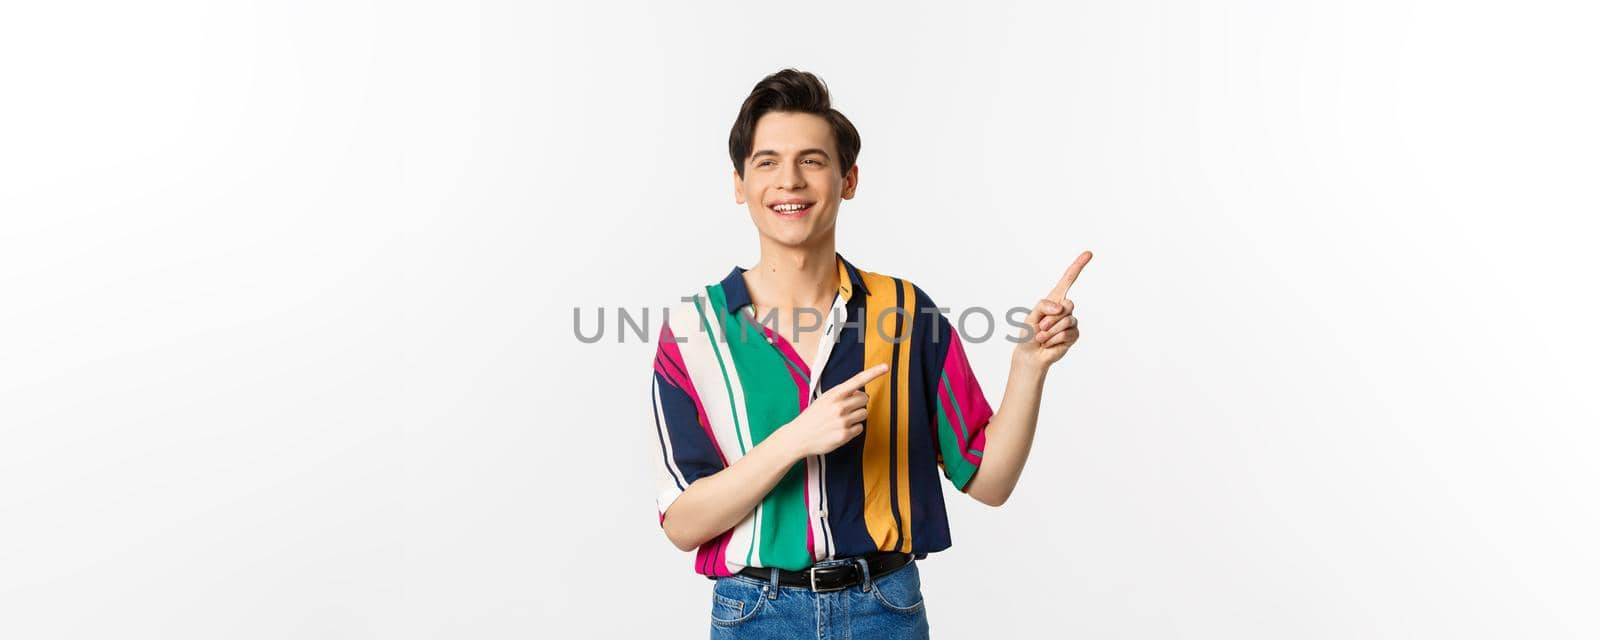 Carefree guy in stylish shirt pointing fingers at upper right corner, showing promo banner or logo, smiling and talking to someone, standing over white background by Benzoix